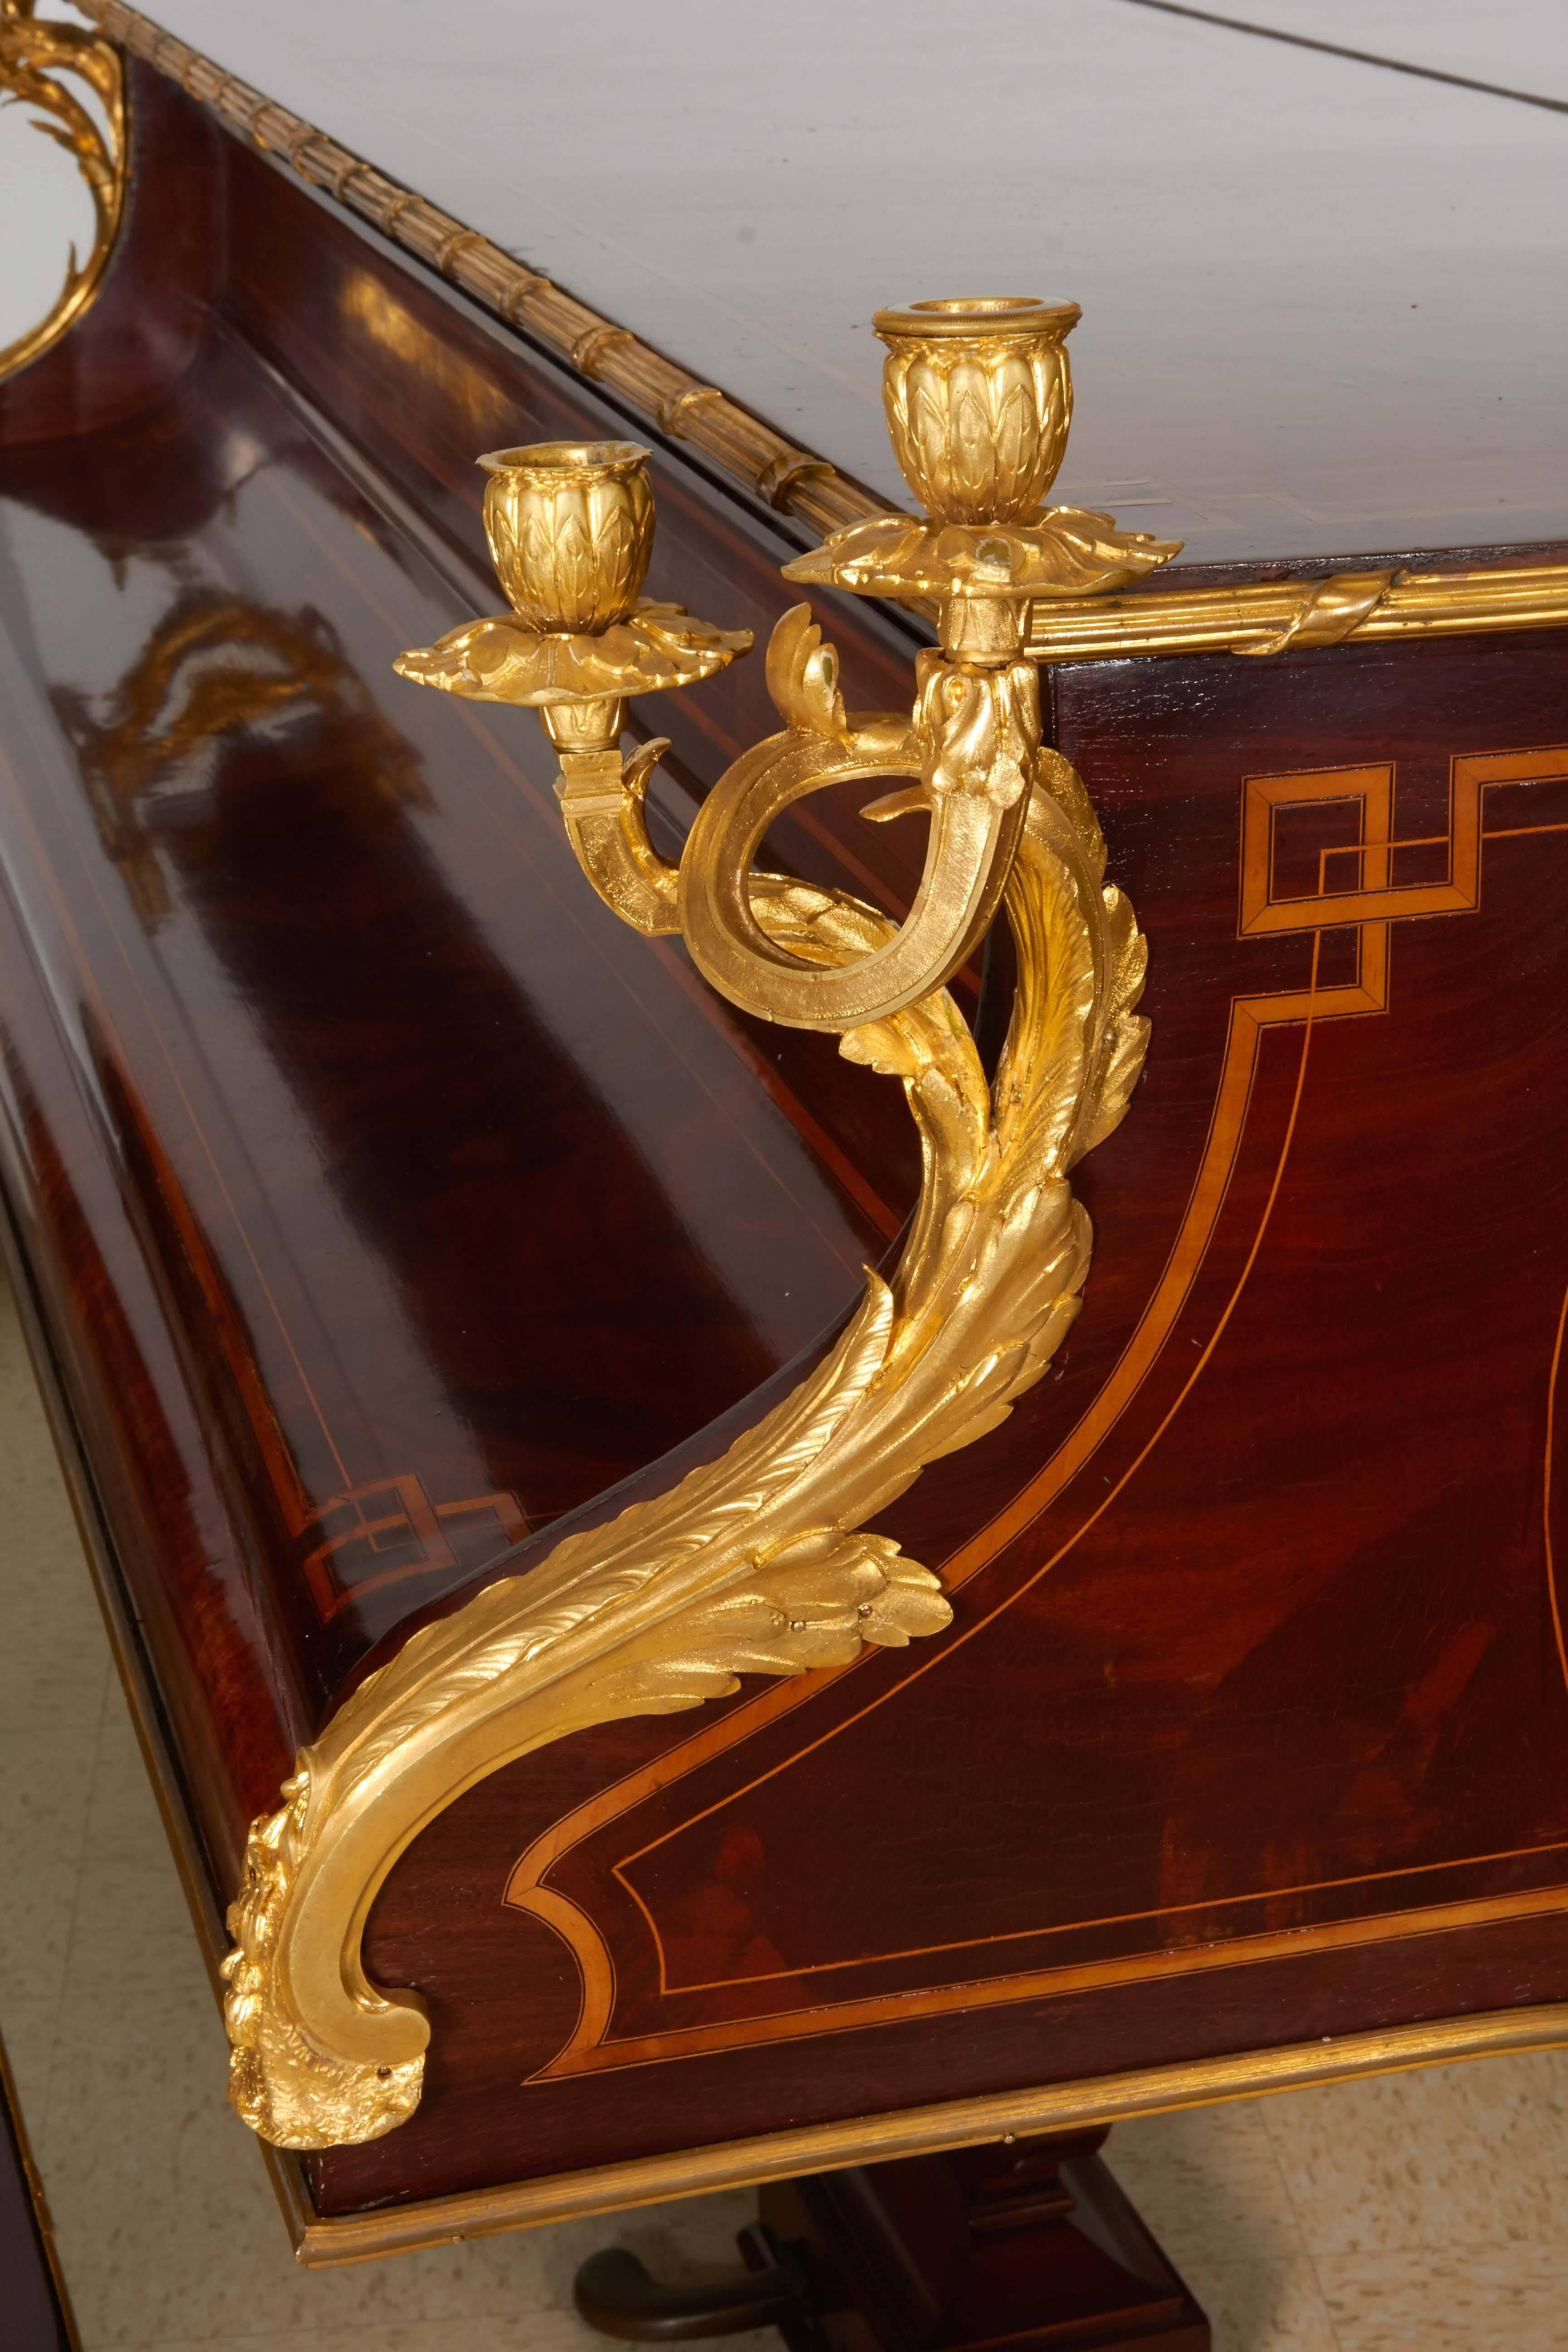 A magnificent French ormolu bronze mounted kingwood, marquetry, and vernis martin piano by Pleyel. Bronze mounts are by Ferdinand Barbedienne (back of some of the mounts are stamped FB) in the taste of Leon Message / Francois Linke.

19th